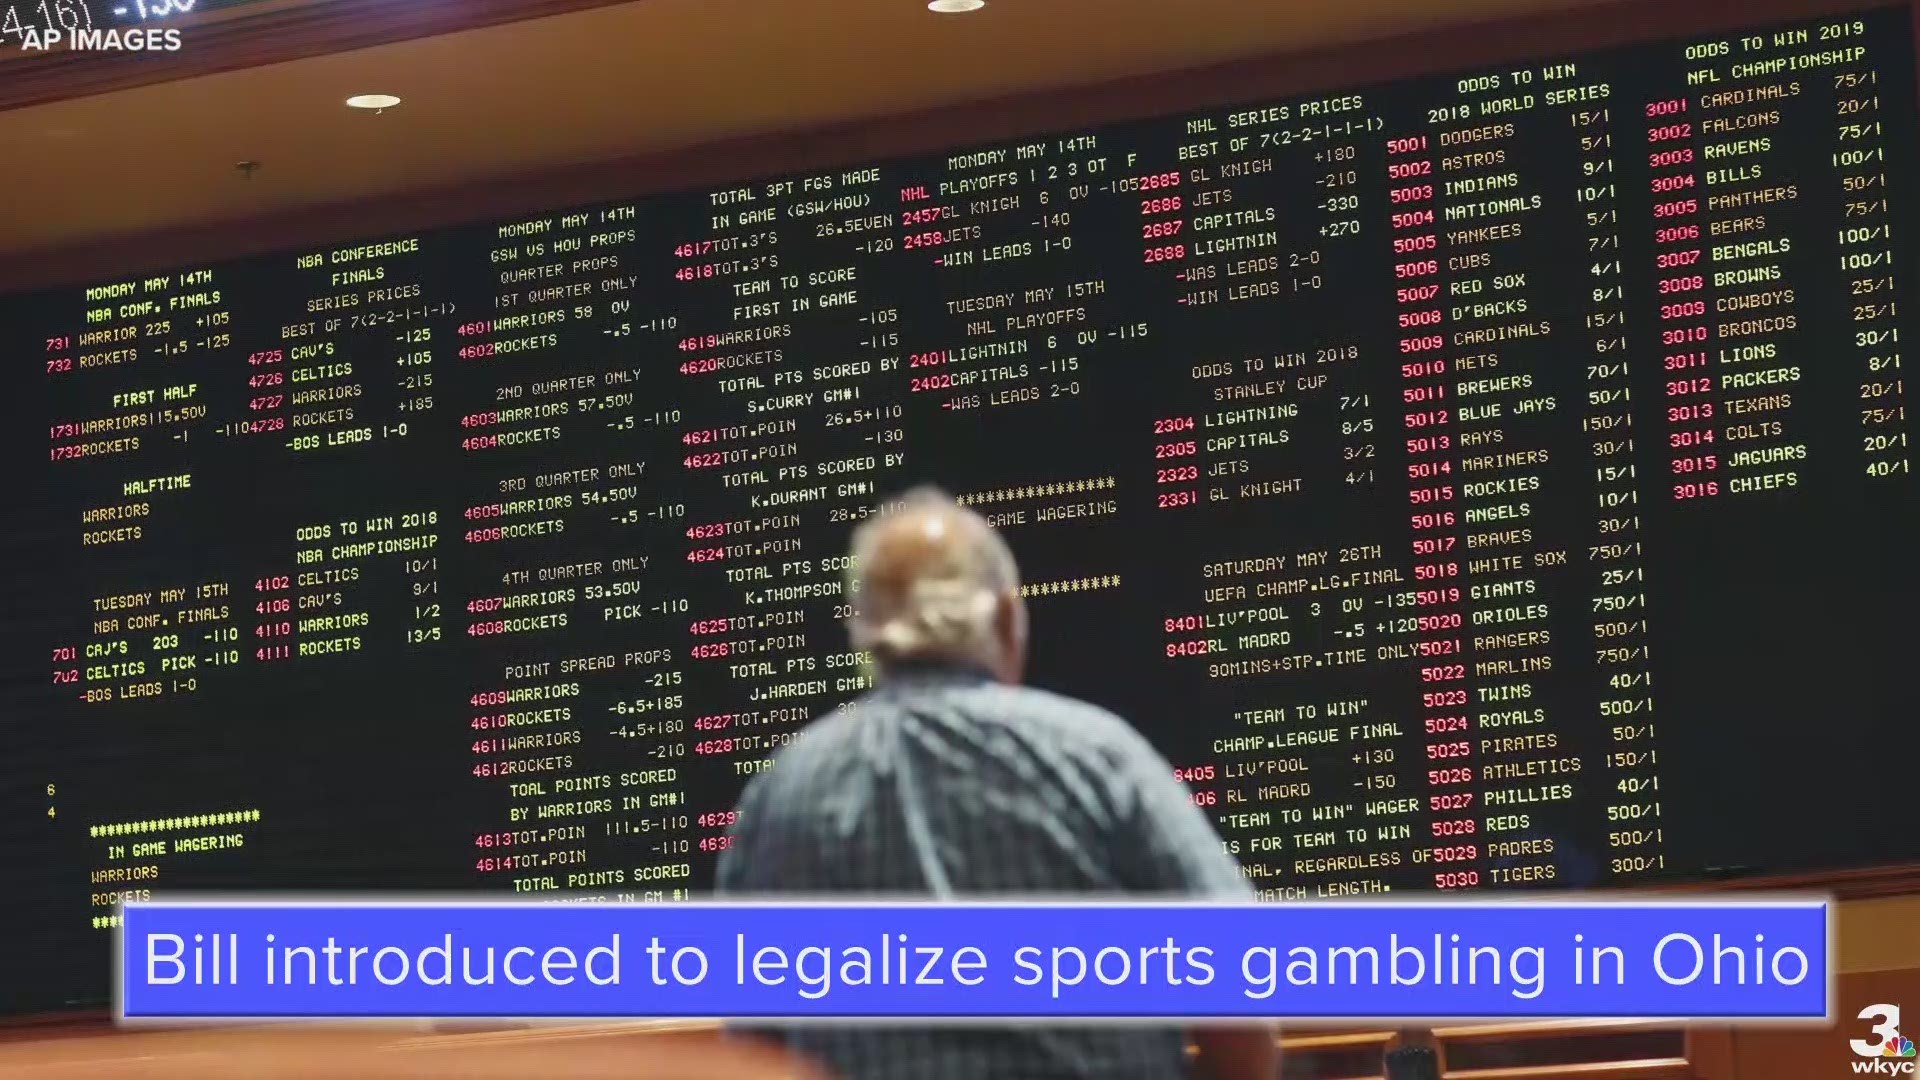 On Tuesday, State Representatives Dave Greenspan (R-Westlake) and Brigid Kelly (D-Cincinnati) introduced a bipartisan bill to create a Sports Gaming Advisory Board in Ohio, paving the way for legalized sports gambling in the state.